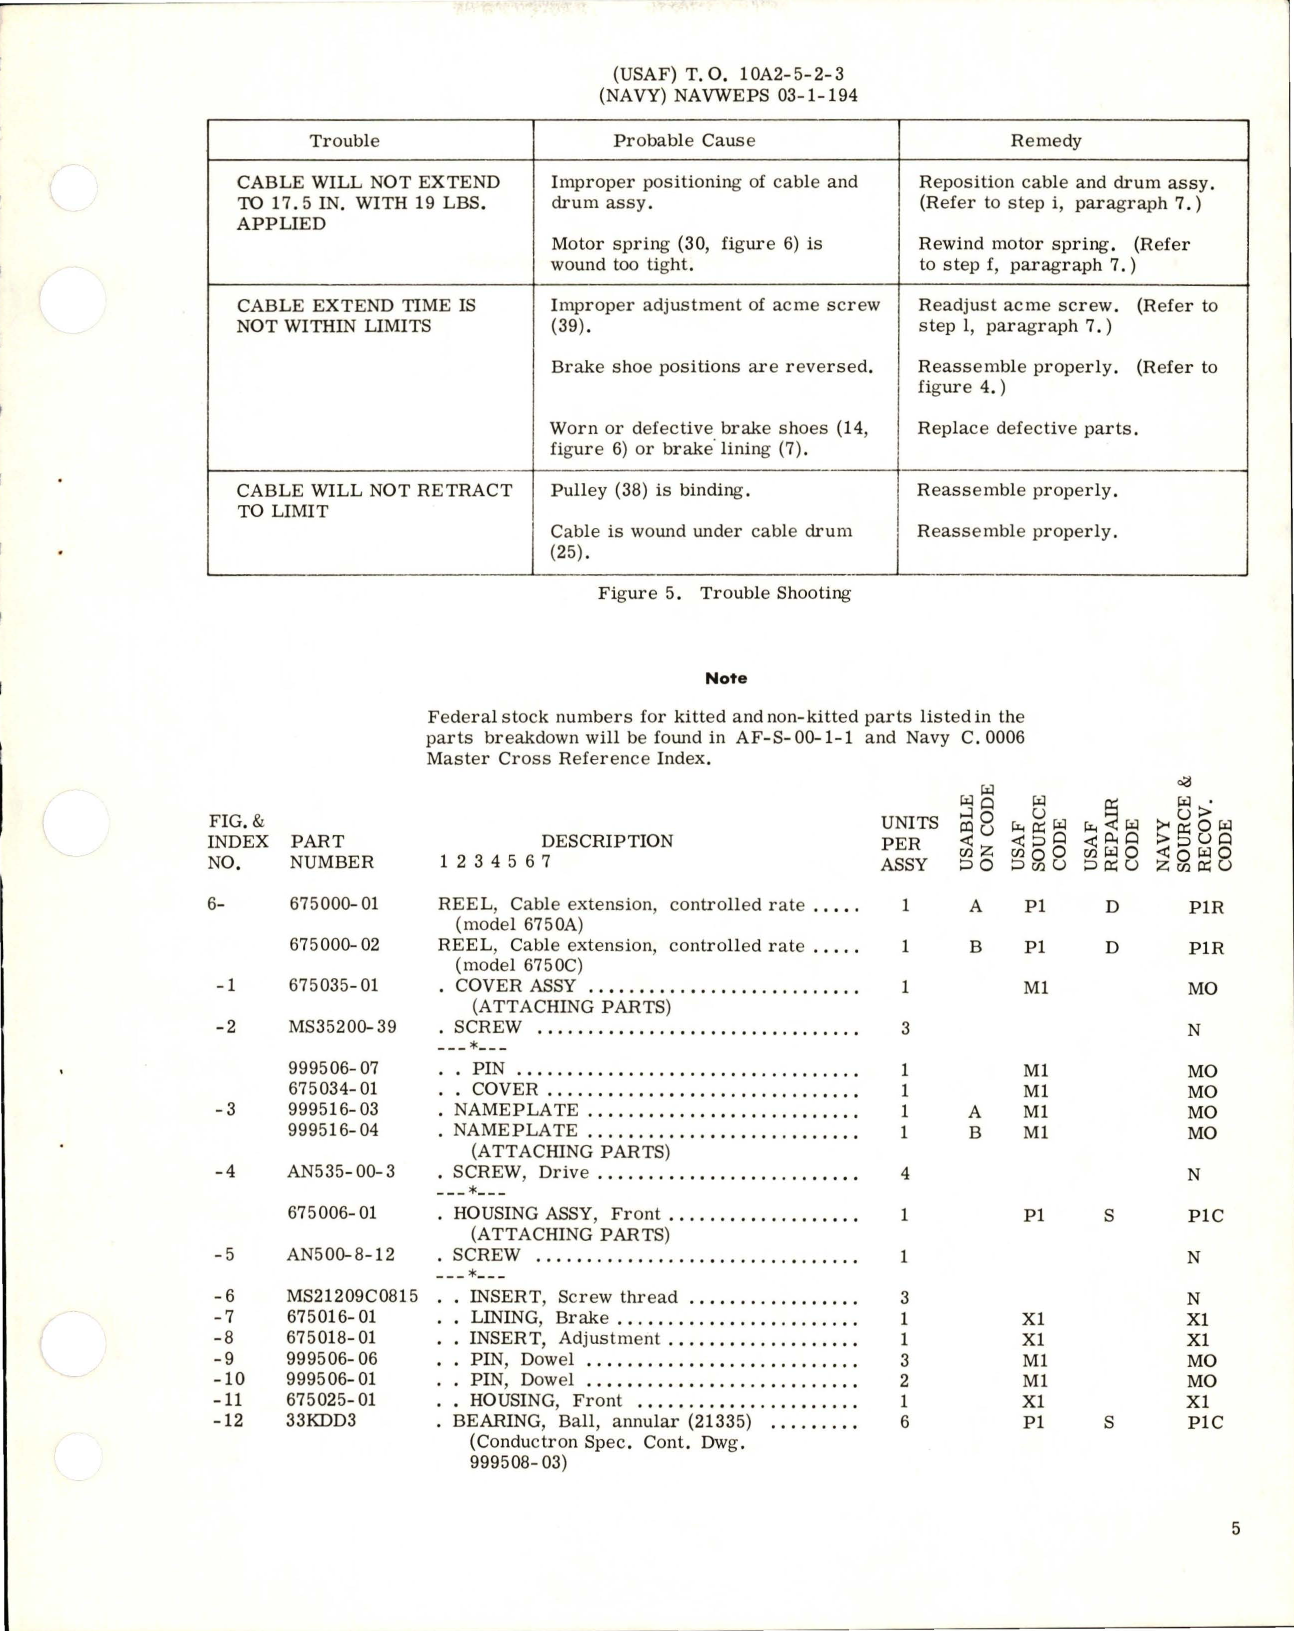 Sample page 5 from AirCorps Library document: Overhaul Instructions with Parts Breakdown for Controlled Rate Cable Extension Reel - Model 6750A and 6750C